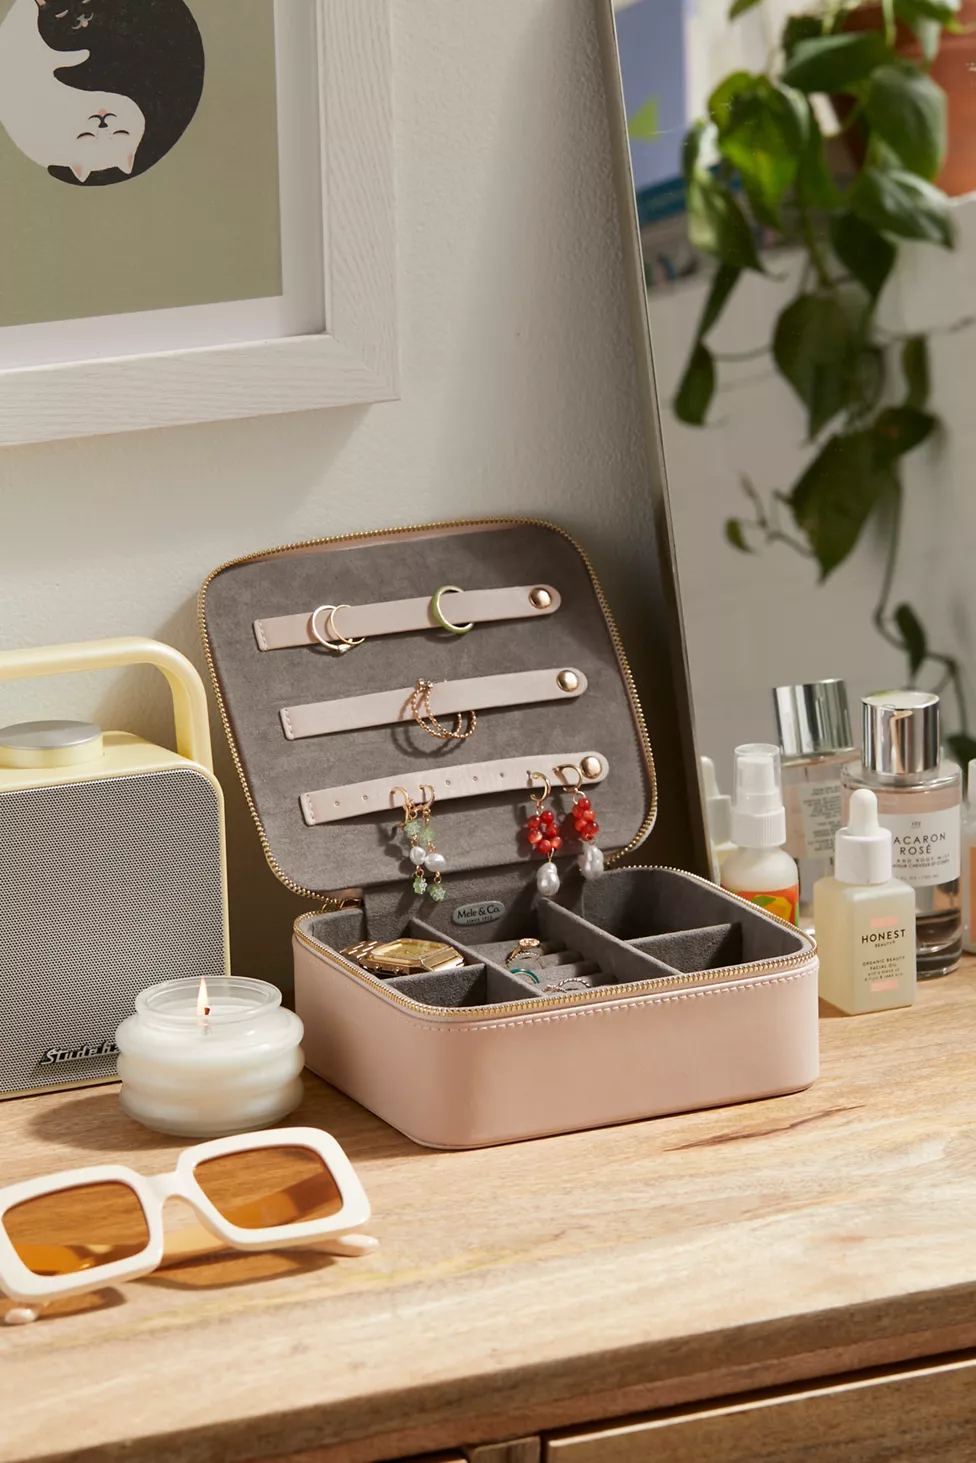 10 Best Travel Jewelry Cases for Your Next Vacation - Q Evon